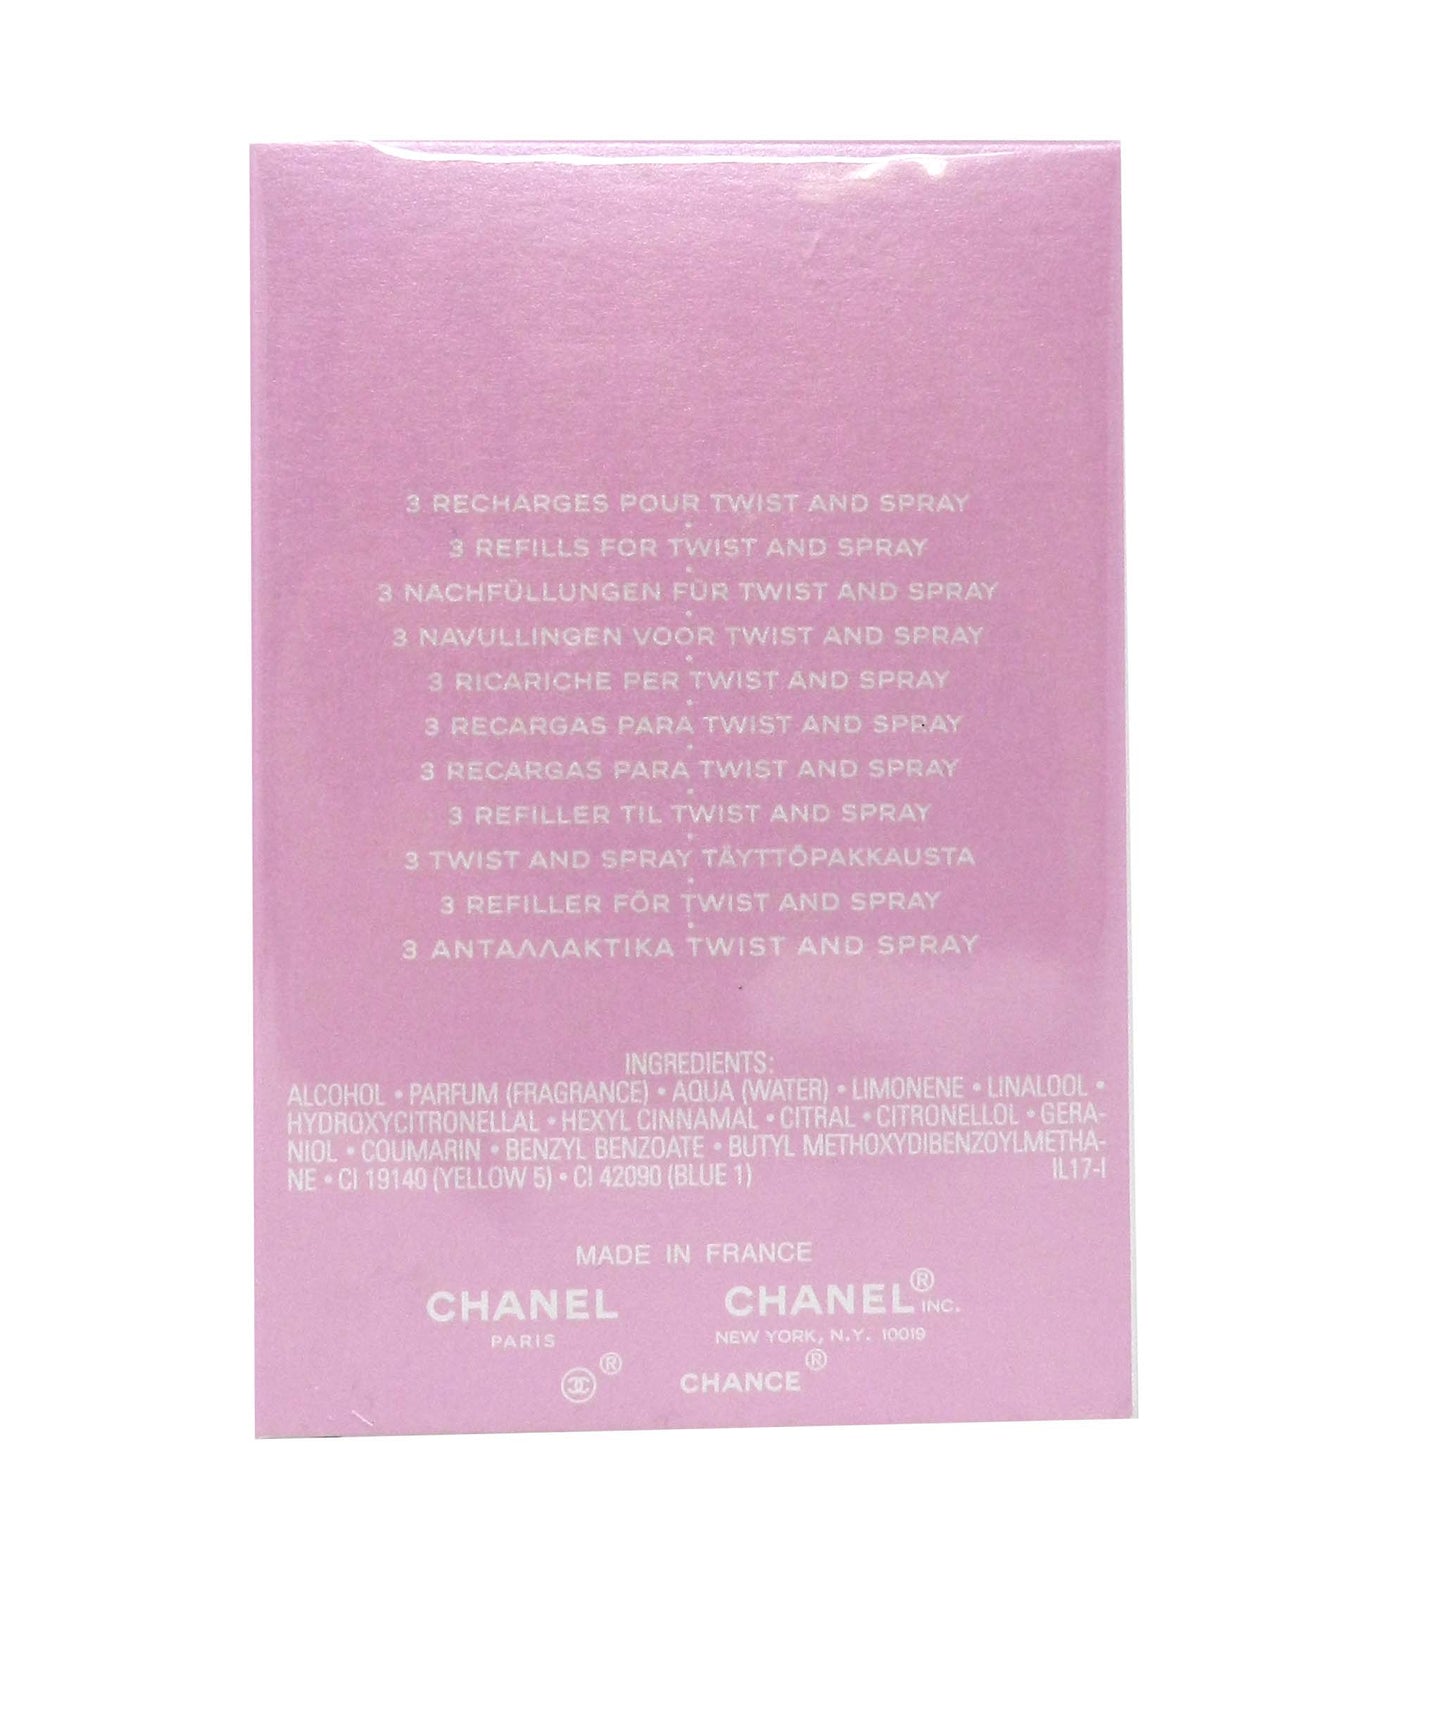 Chance by Chanel for Women - 3 x 0.7 oz EDT Twist and Spray